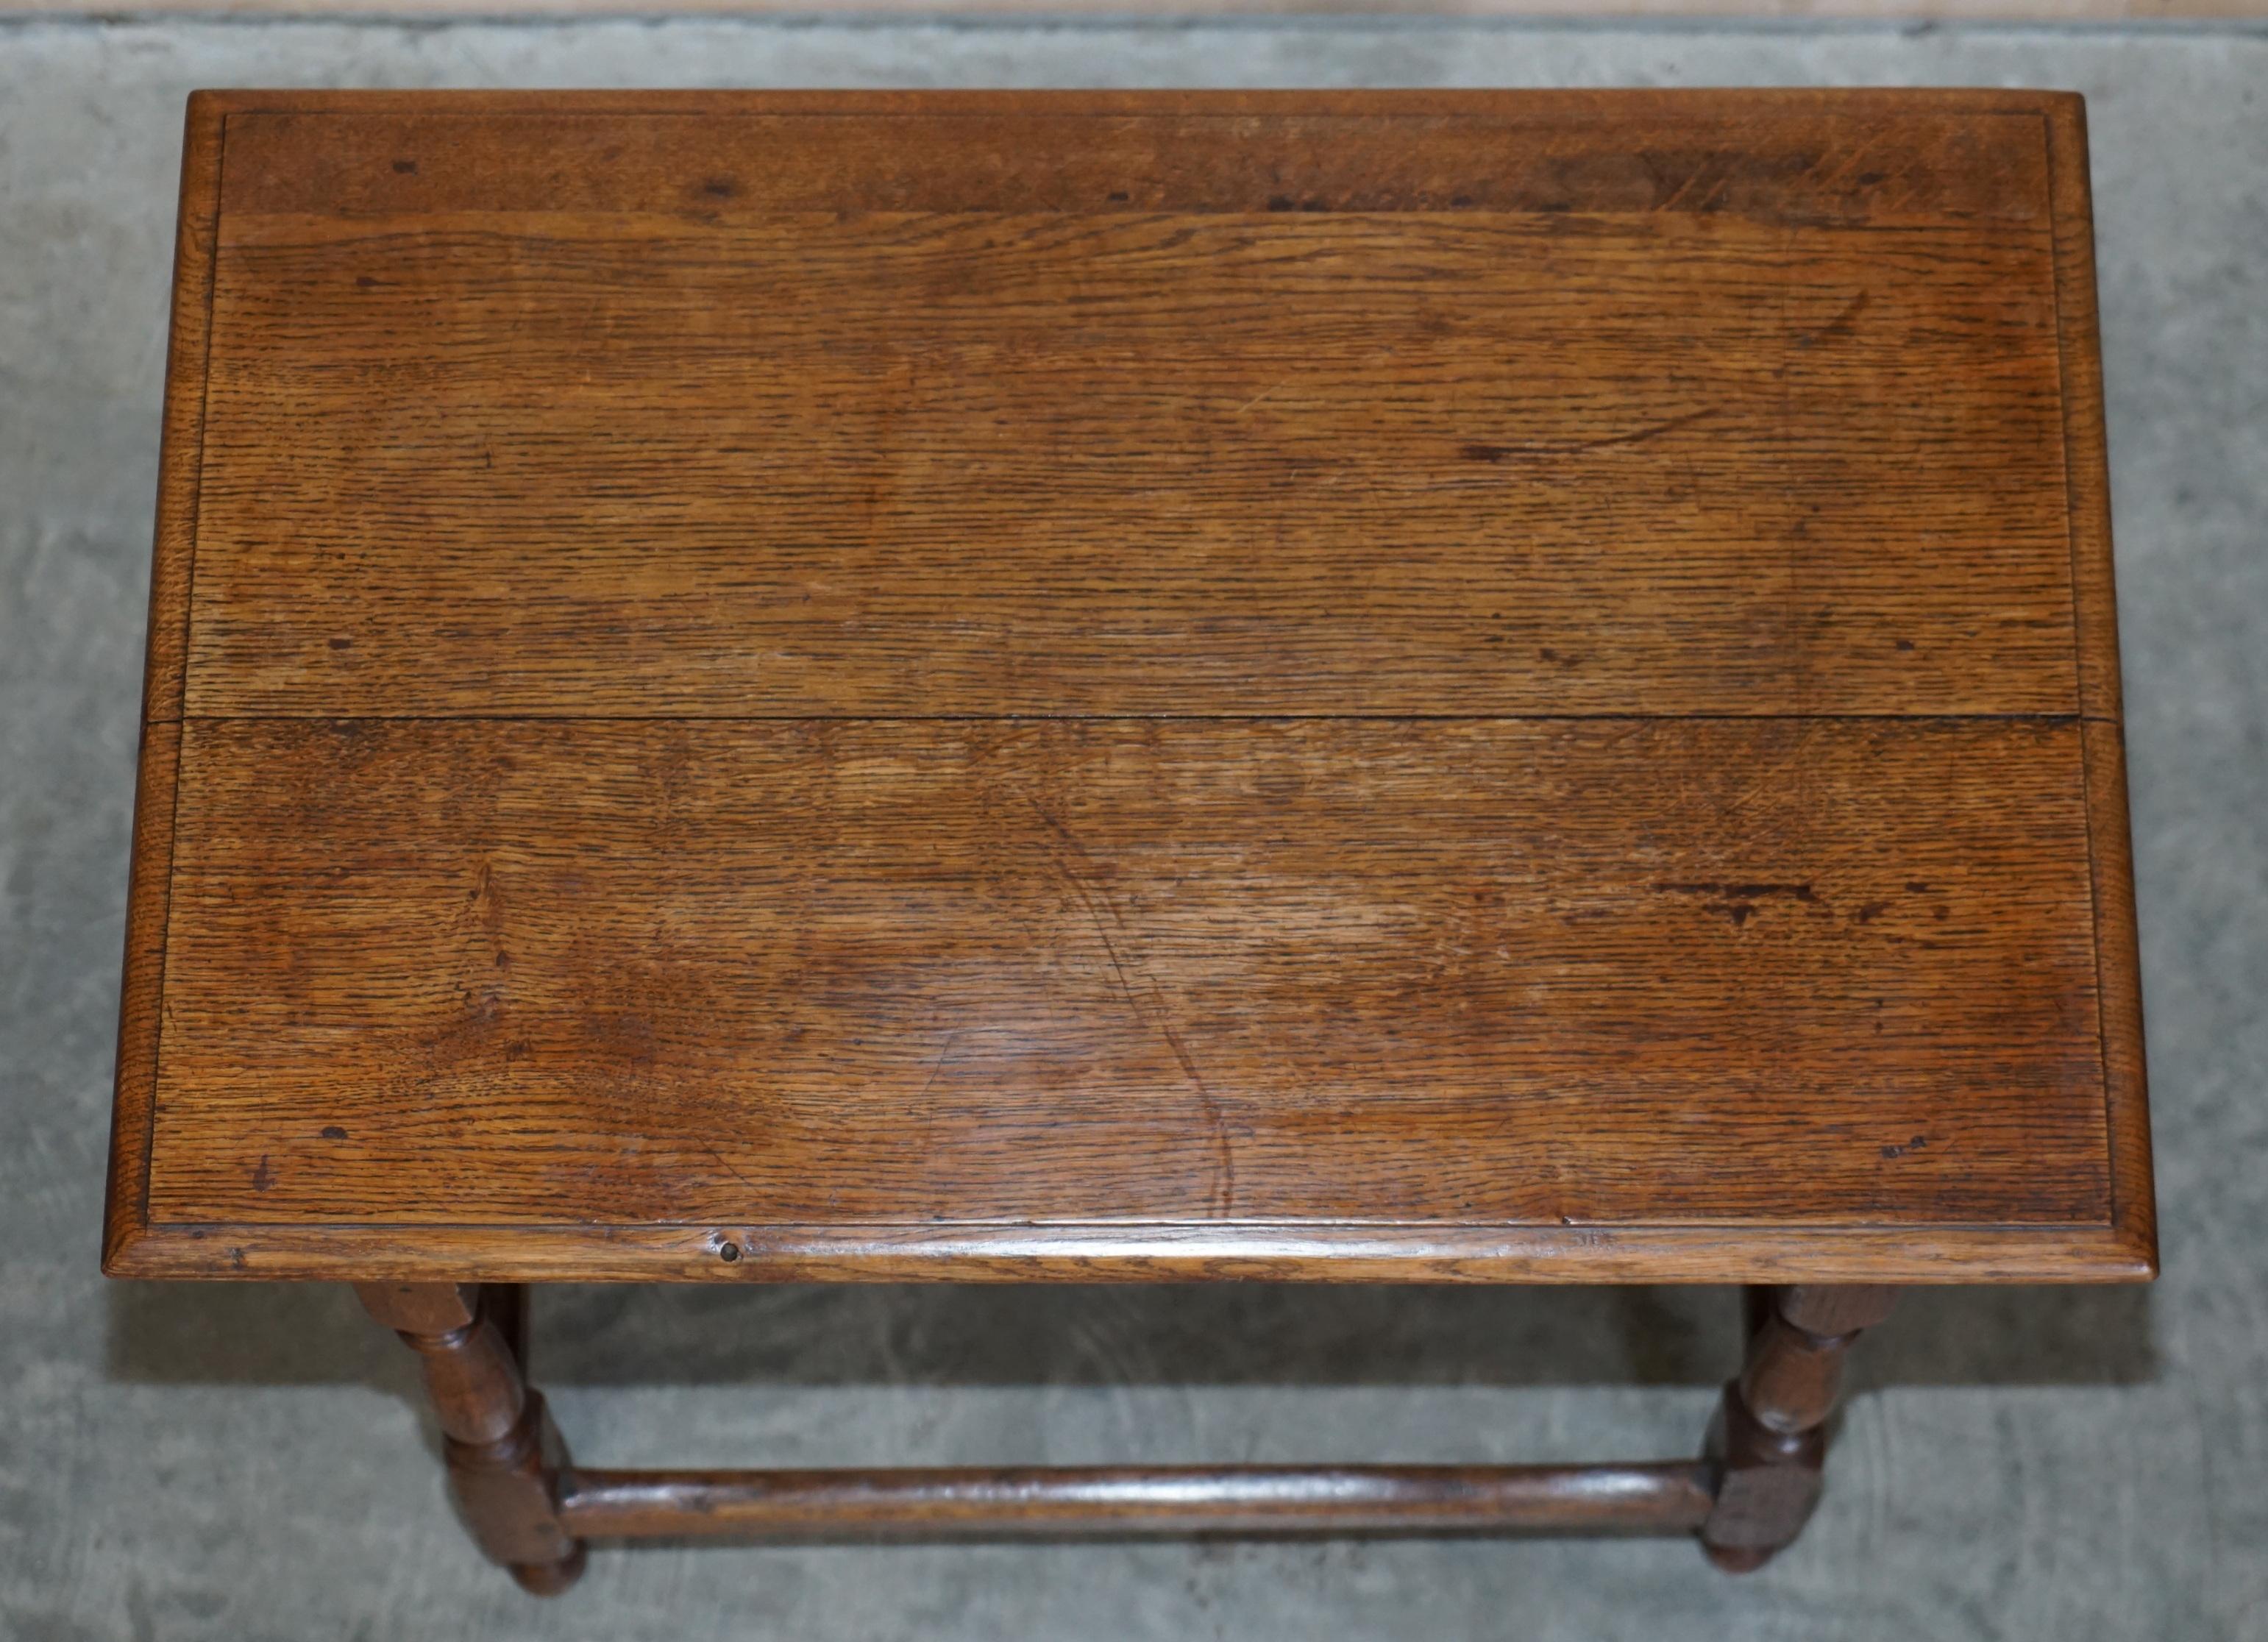 Antique circa 1700 English Oak Jointed Lowboy Side Table with Single Drawer For Sale 3